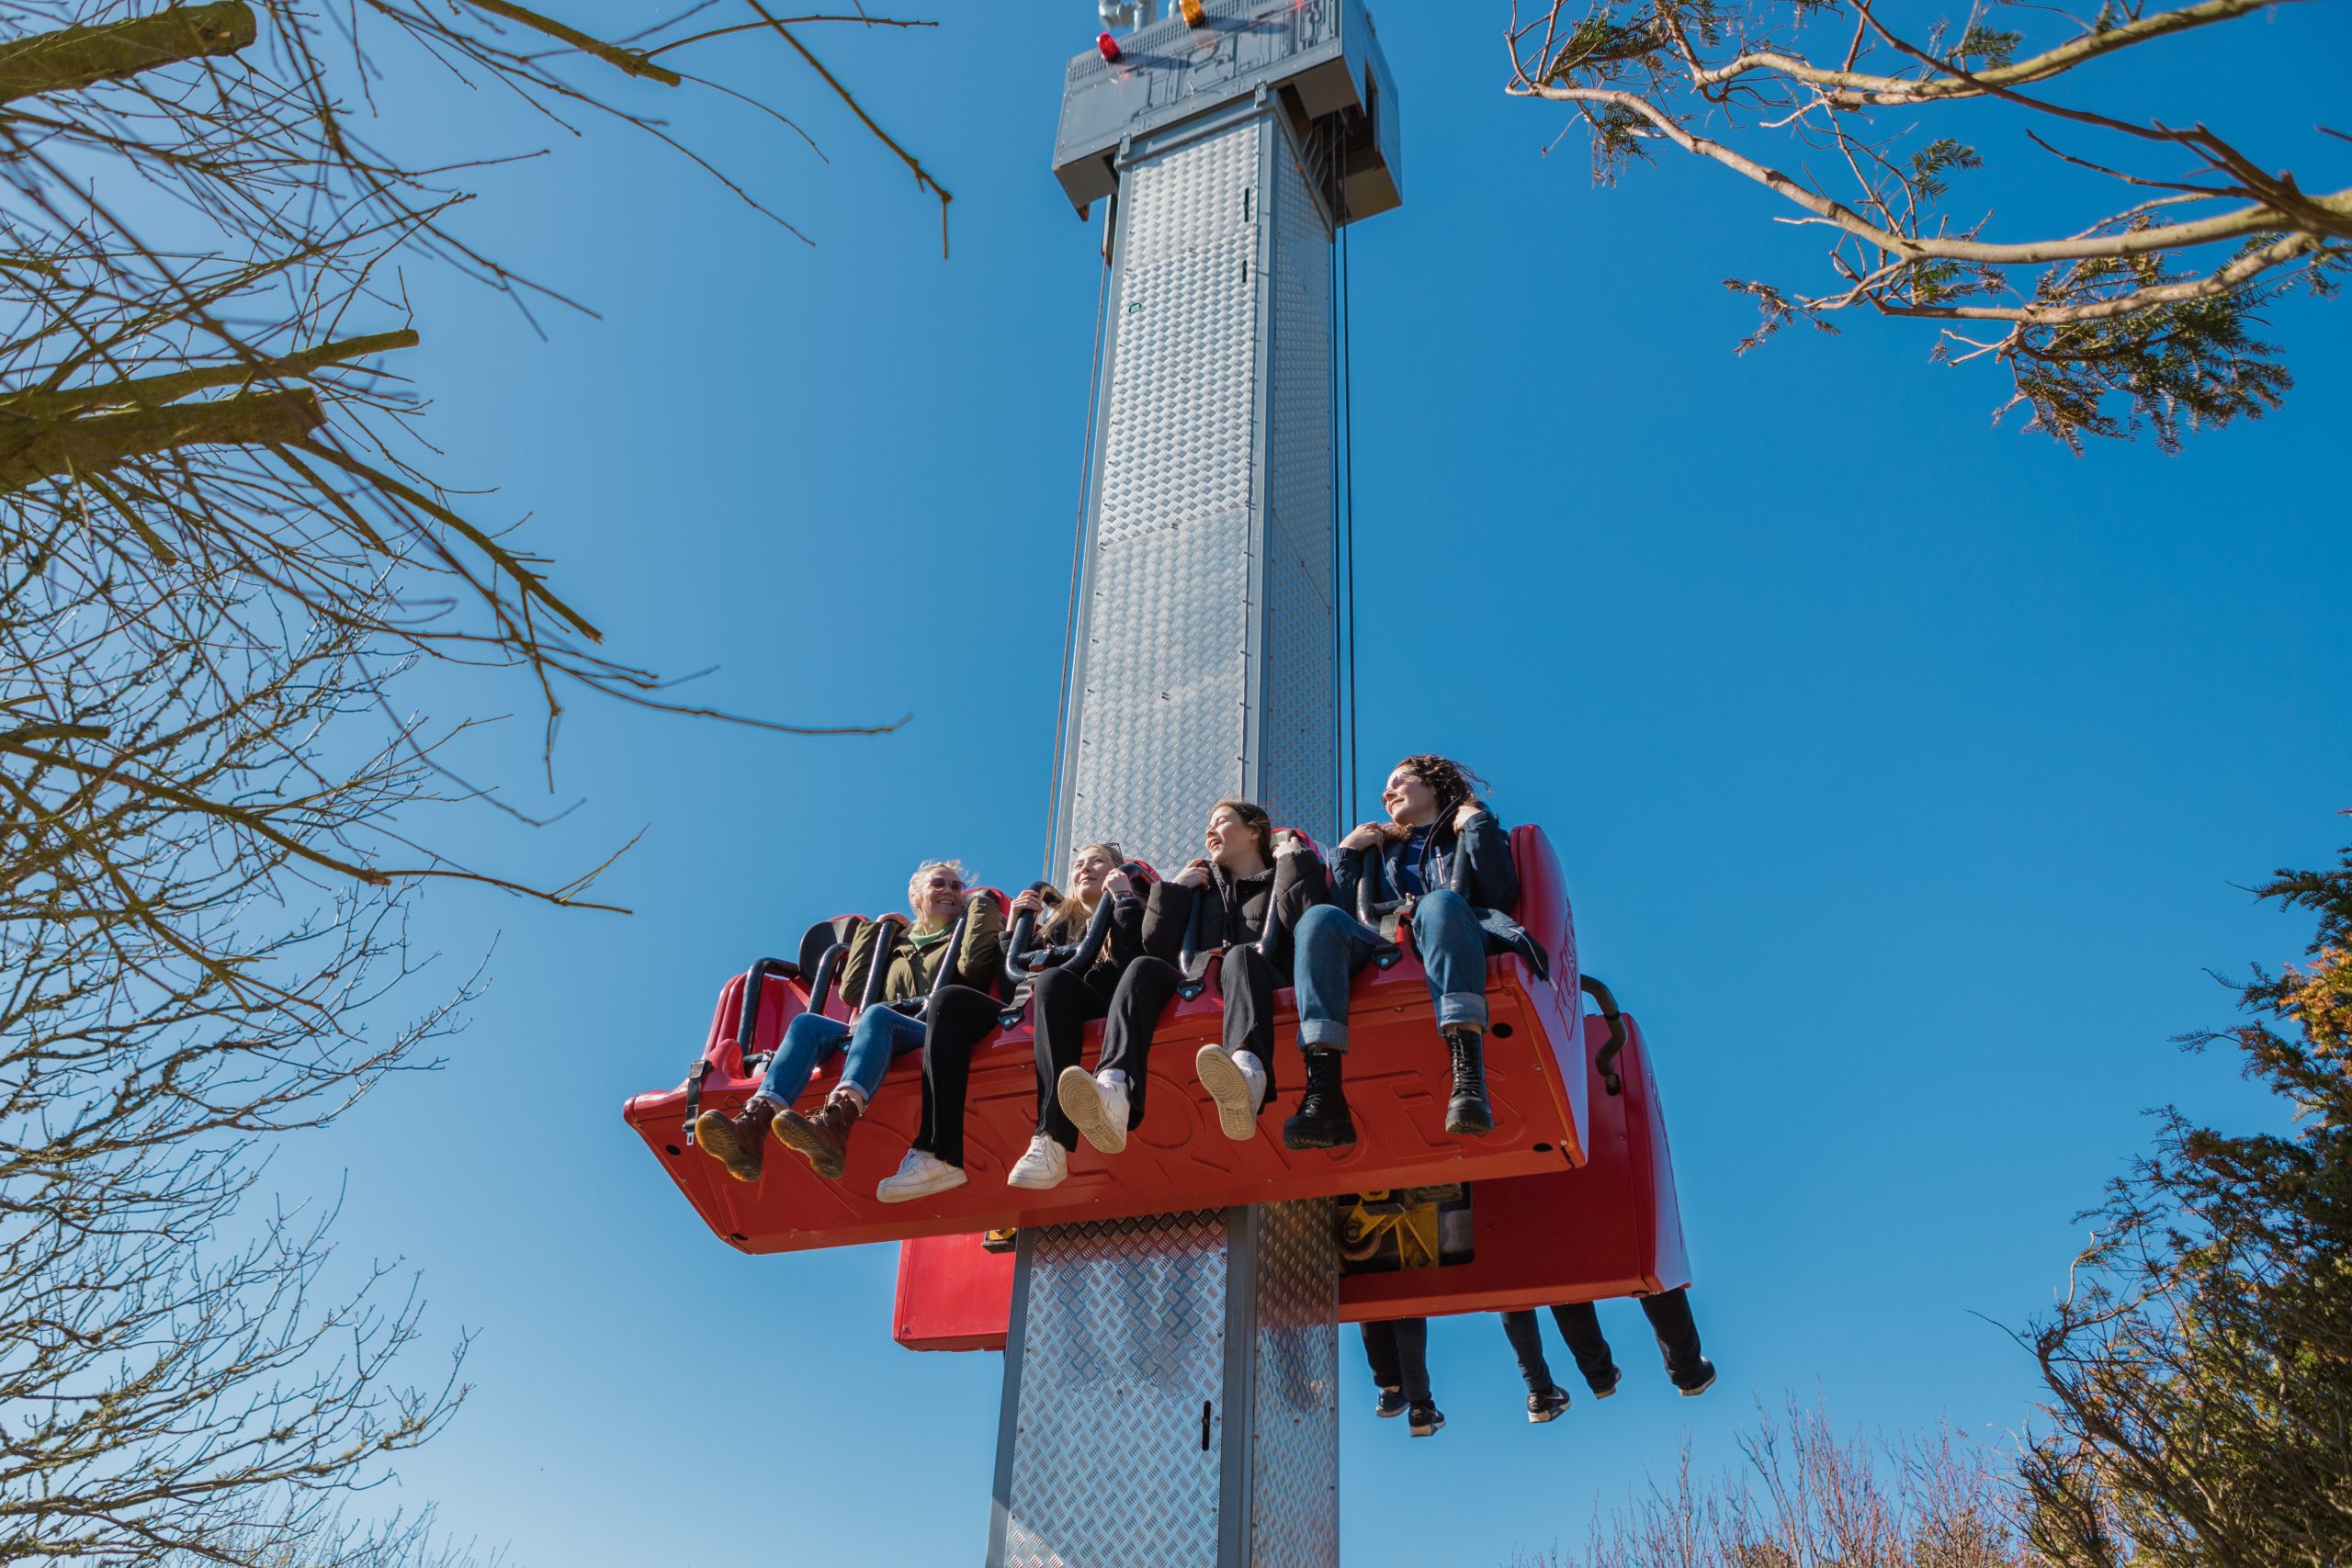 Ride the Evolution drop tower at
Blackgang Chine theme park